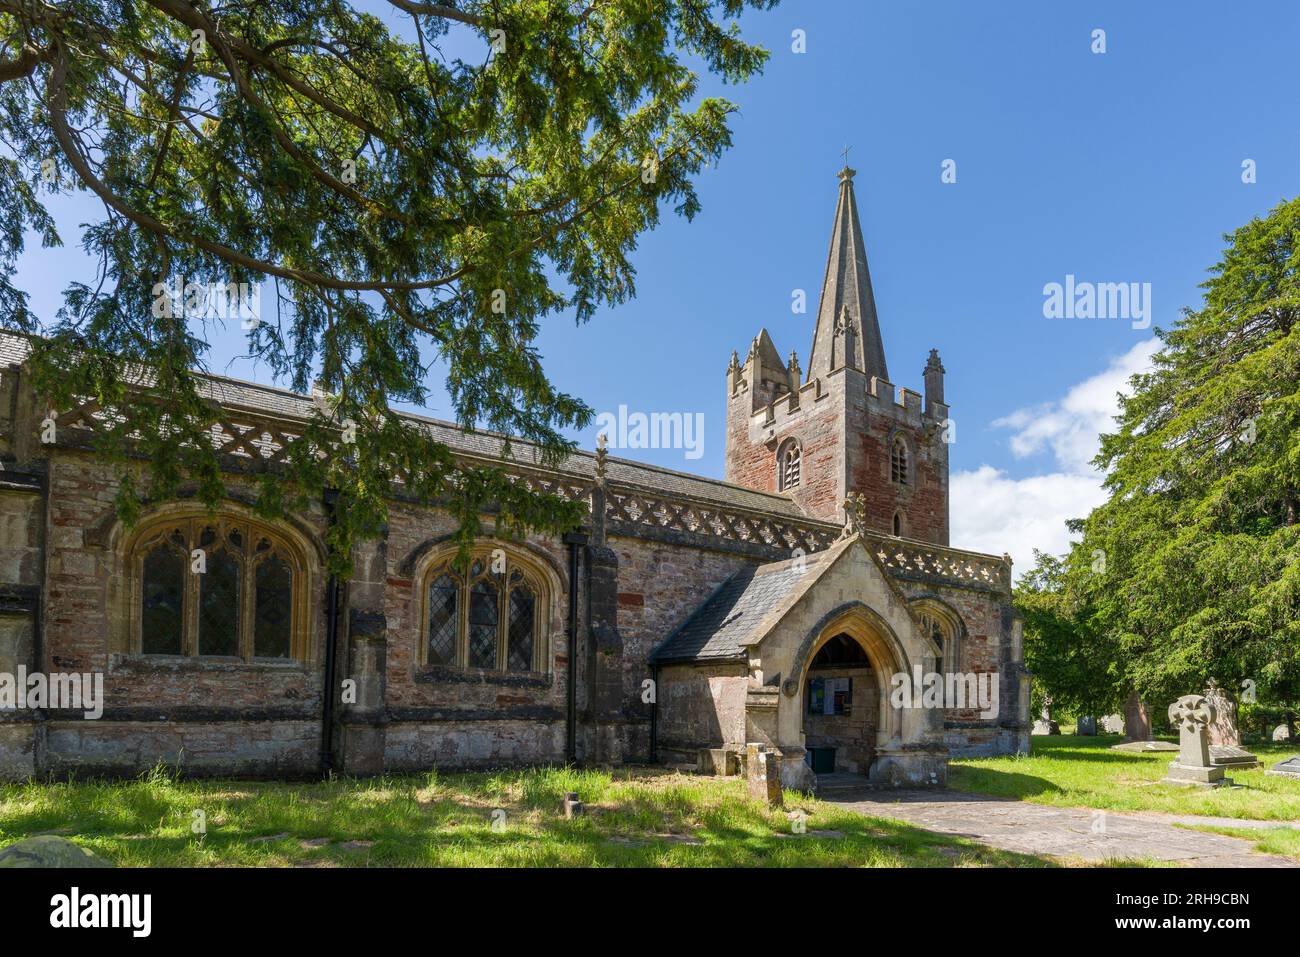 The Church of St Bartholomew in the village of Ubley in the Chew Valley, Bath and North East Somerset, England. Stock Photo